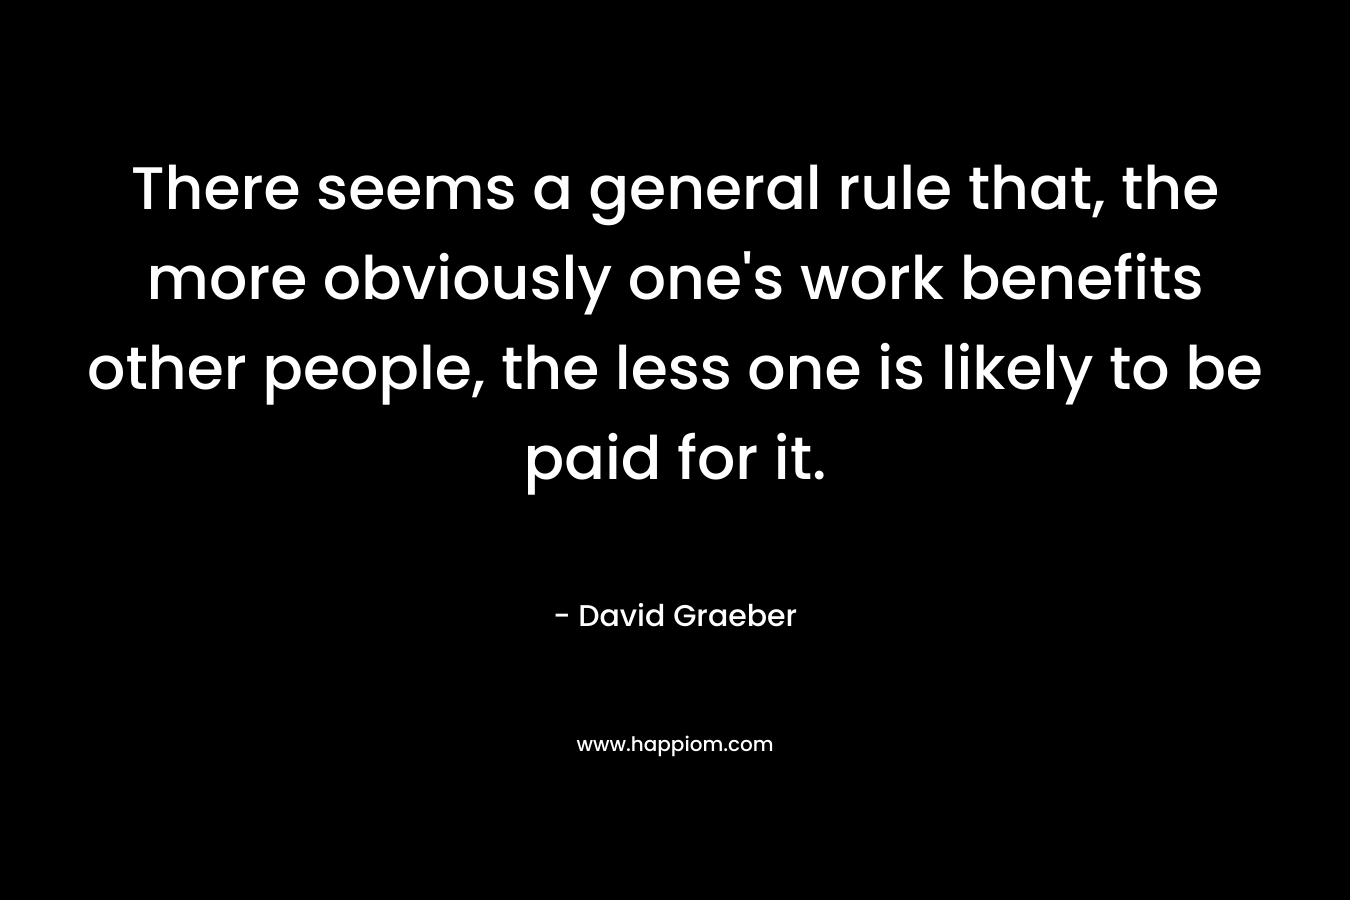 There seems a general rule that, the more obviously one's work benefits other people, the less one is likely to be paid for it.